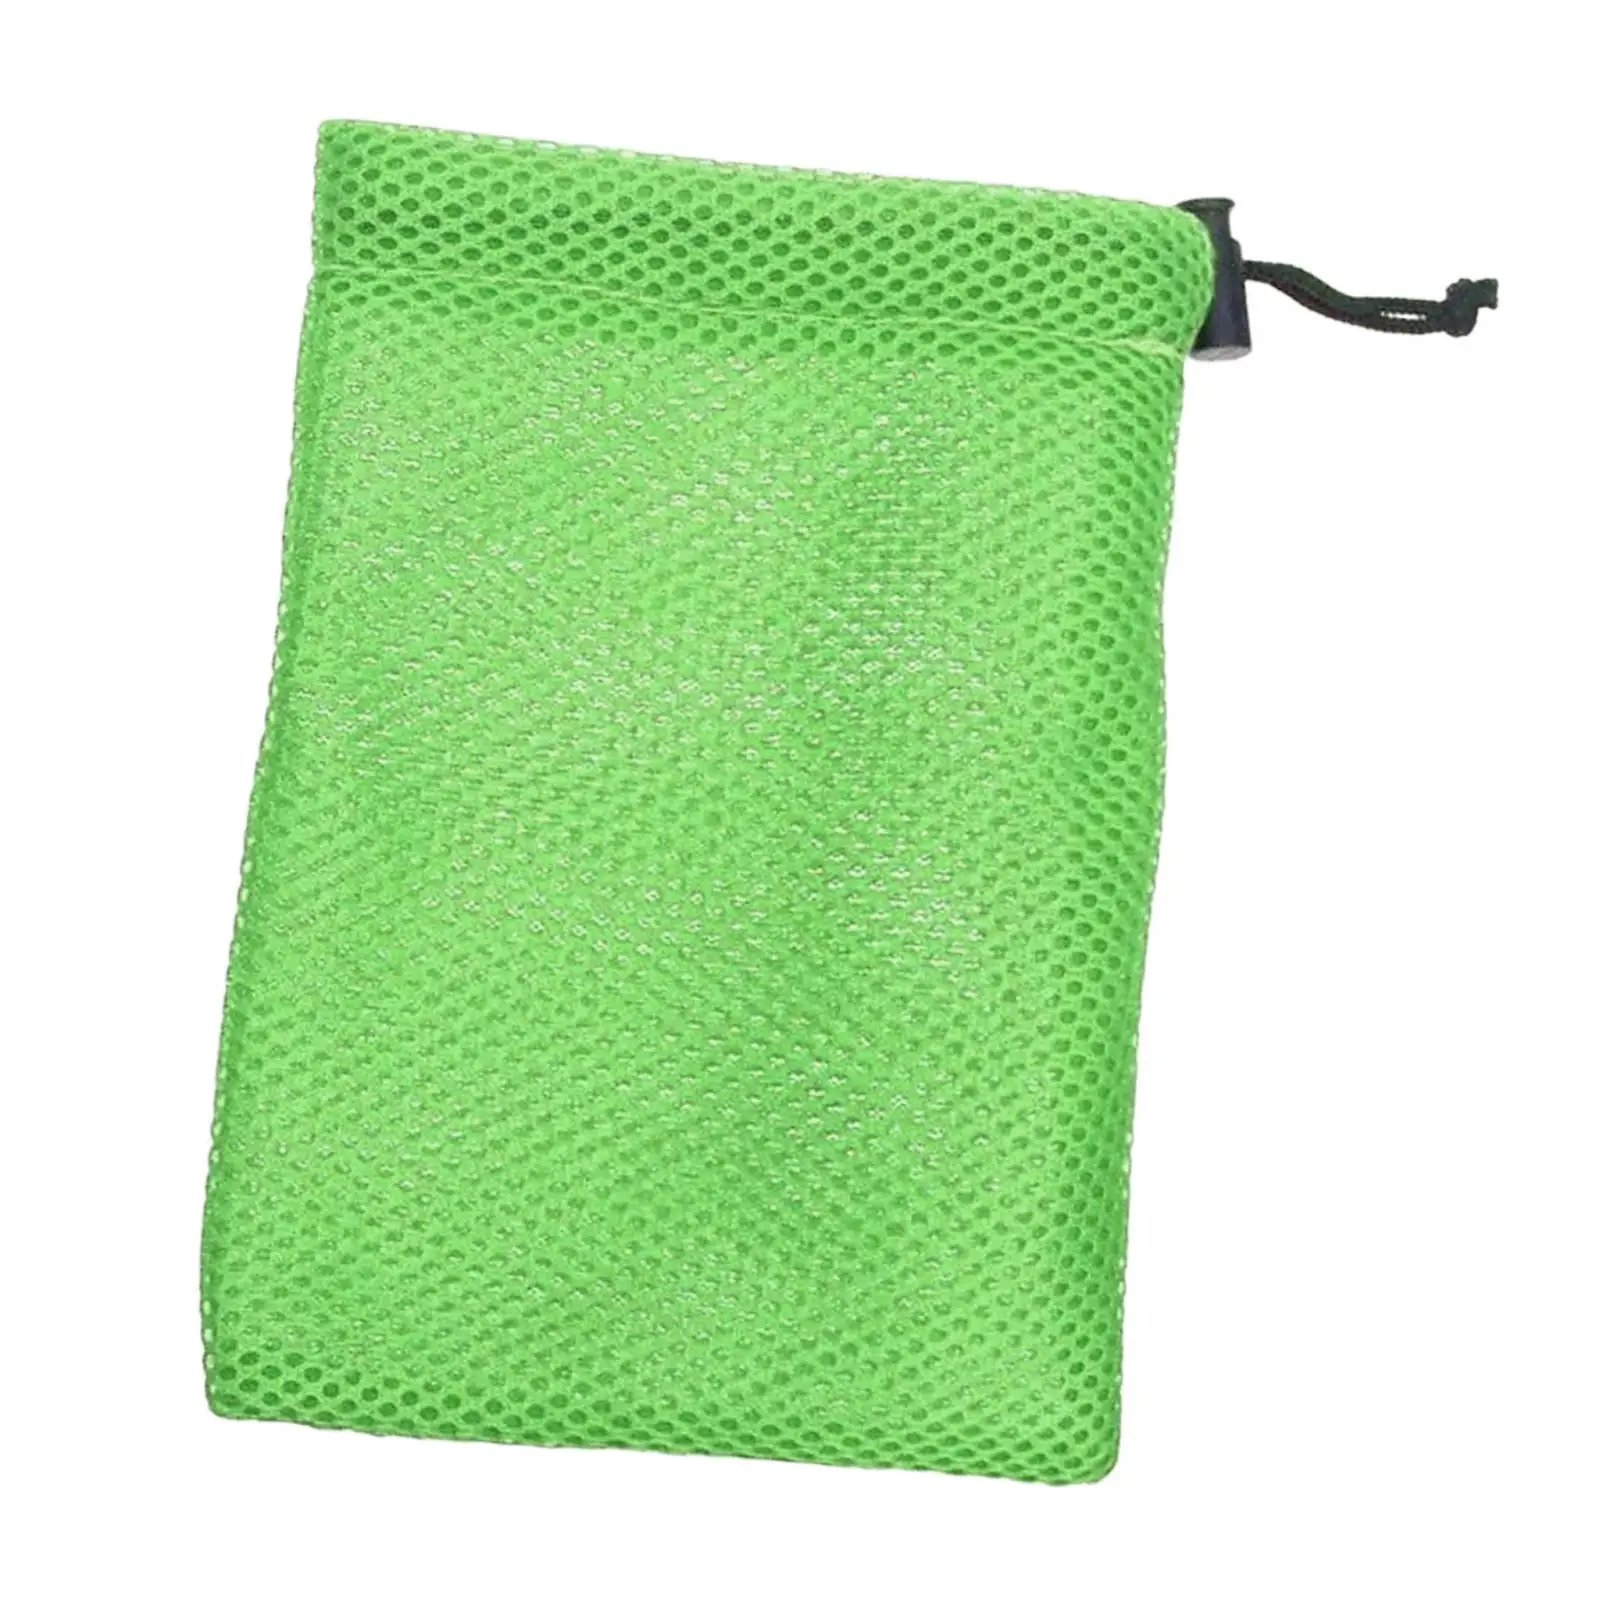 Small Mesh Drawstring Bag Stuff Sack with Cord Lock Closure Mesh Bag Storage Pouch for Collecting Toys Cosmetics Tennis Balls